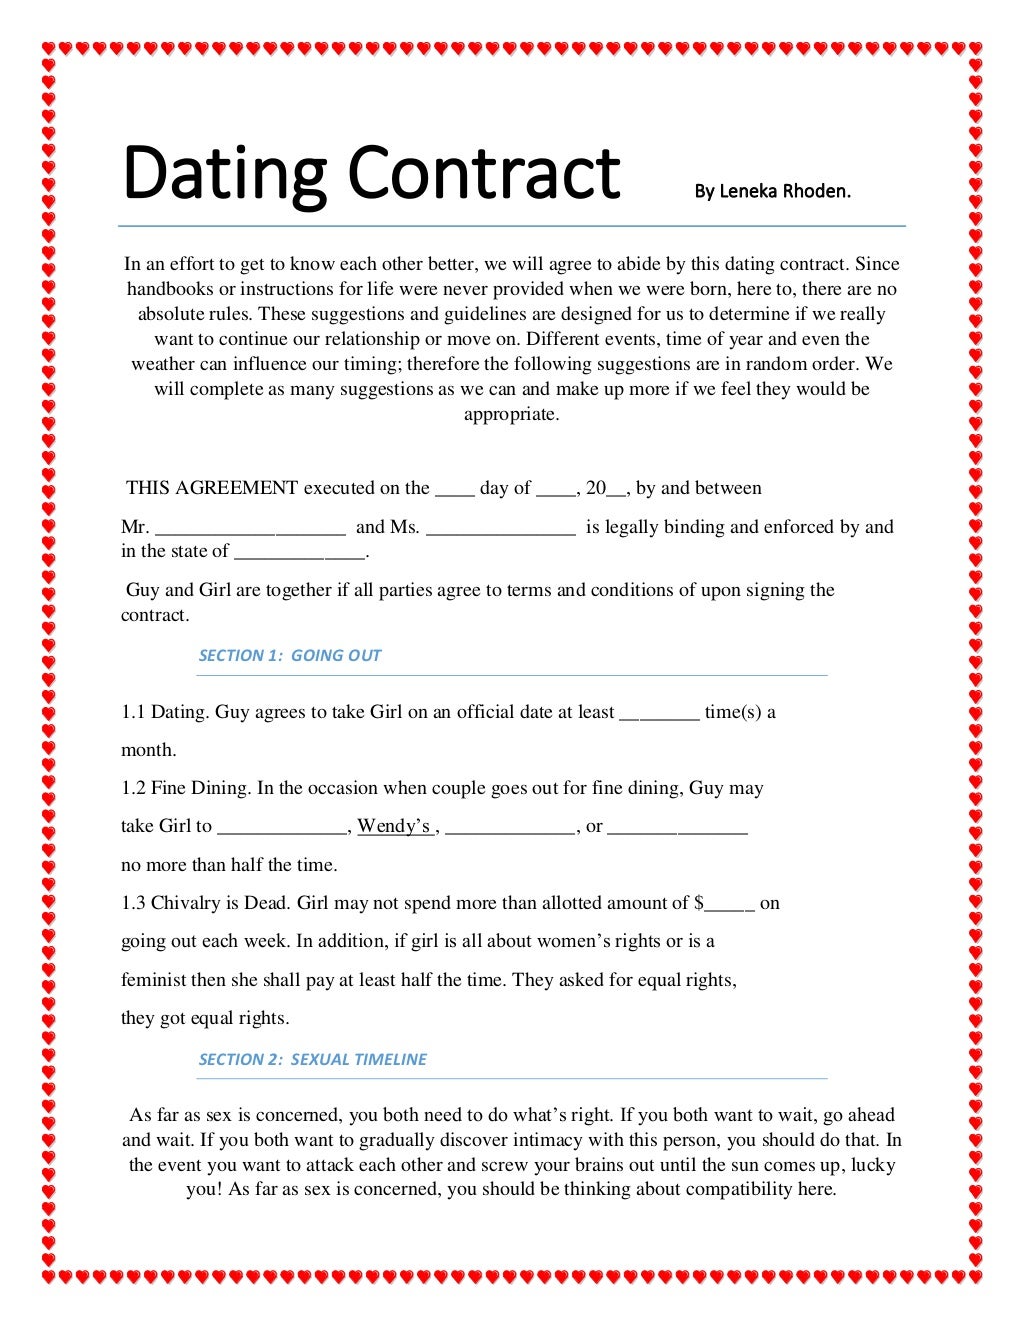 dating-contract